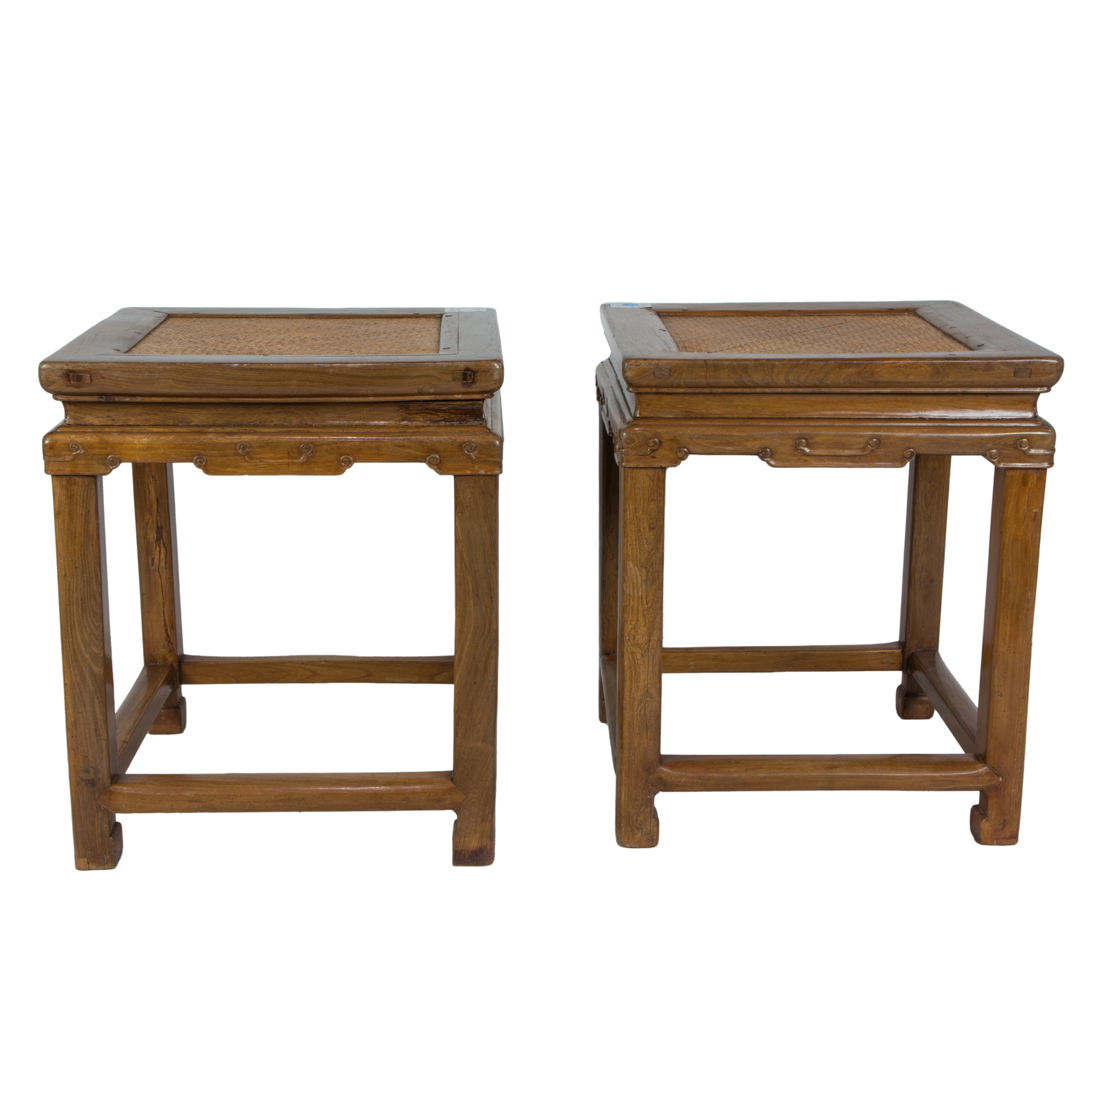 PAIR OF CHINESE HARDWOOD SQUARE FORM 3a104d